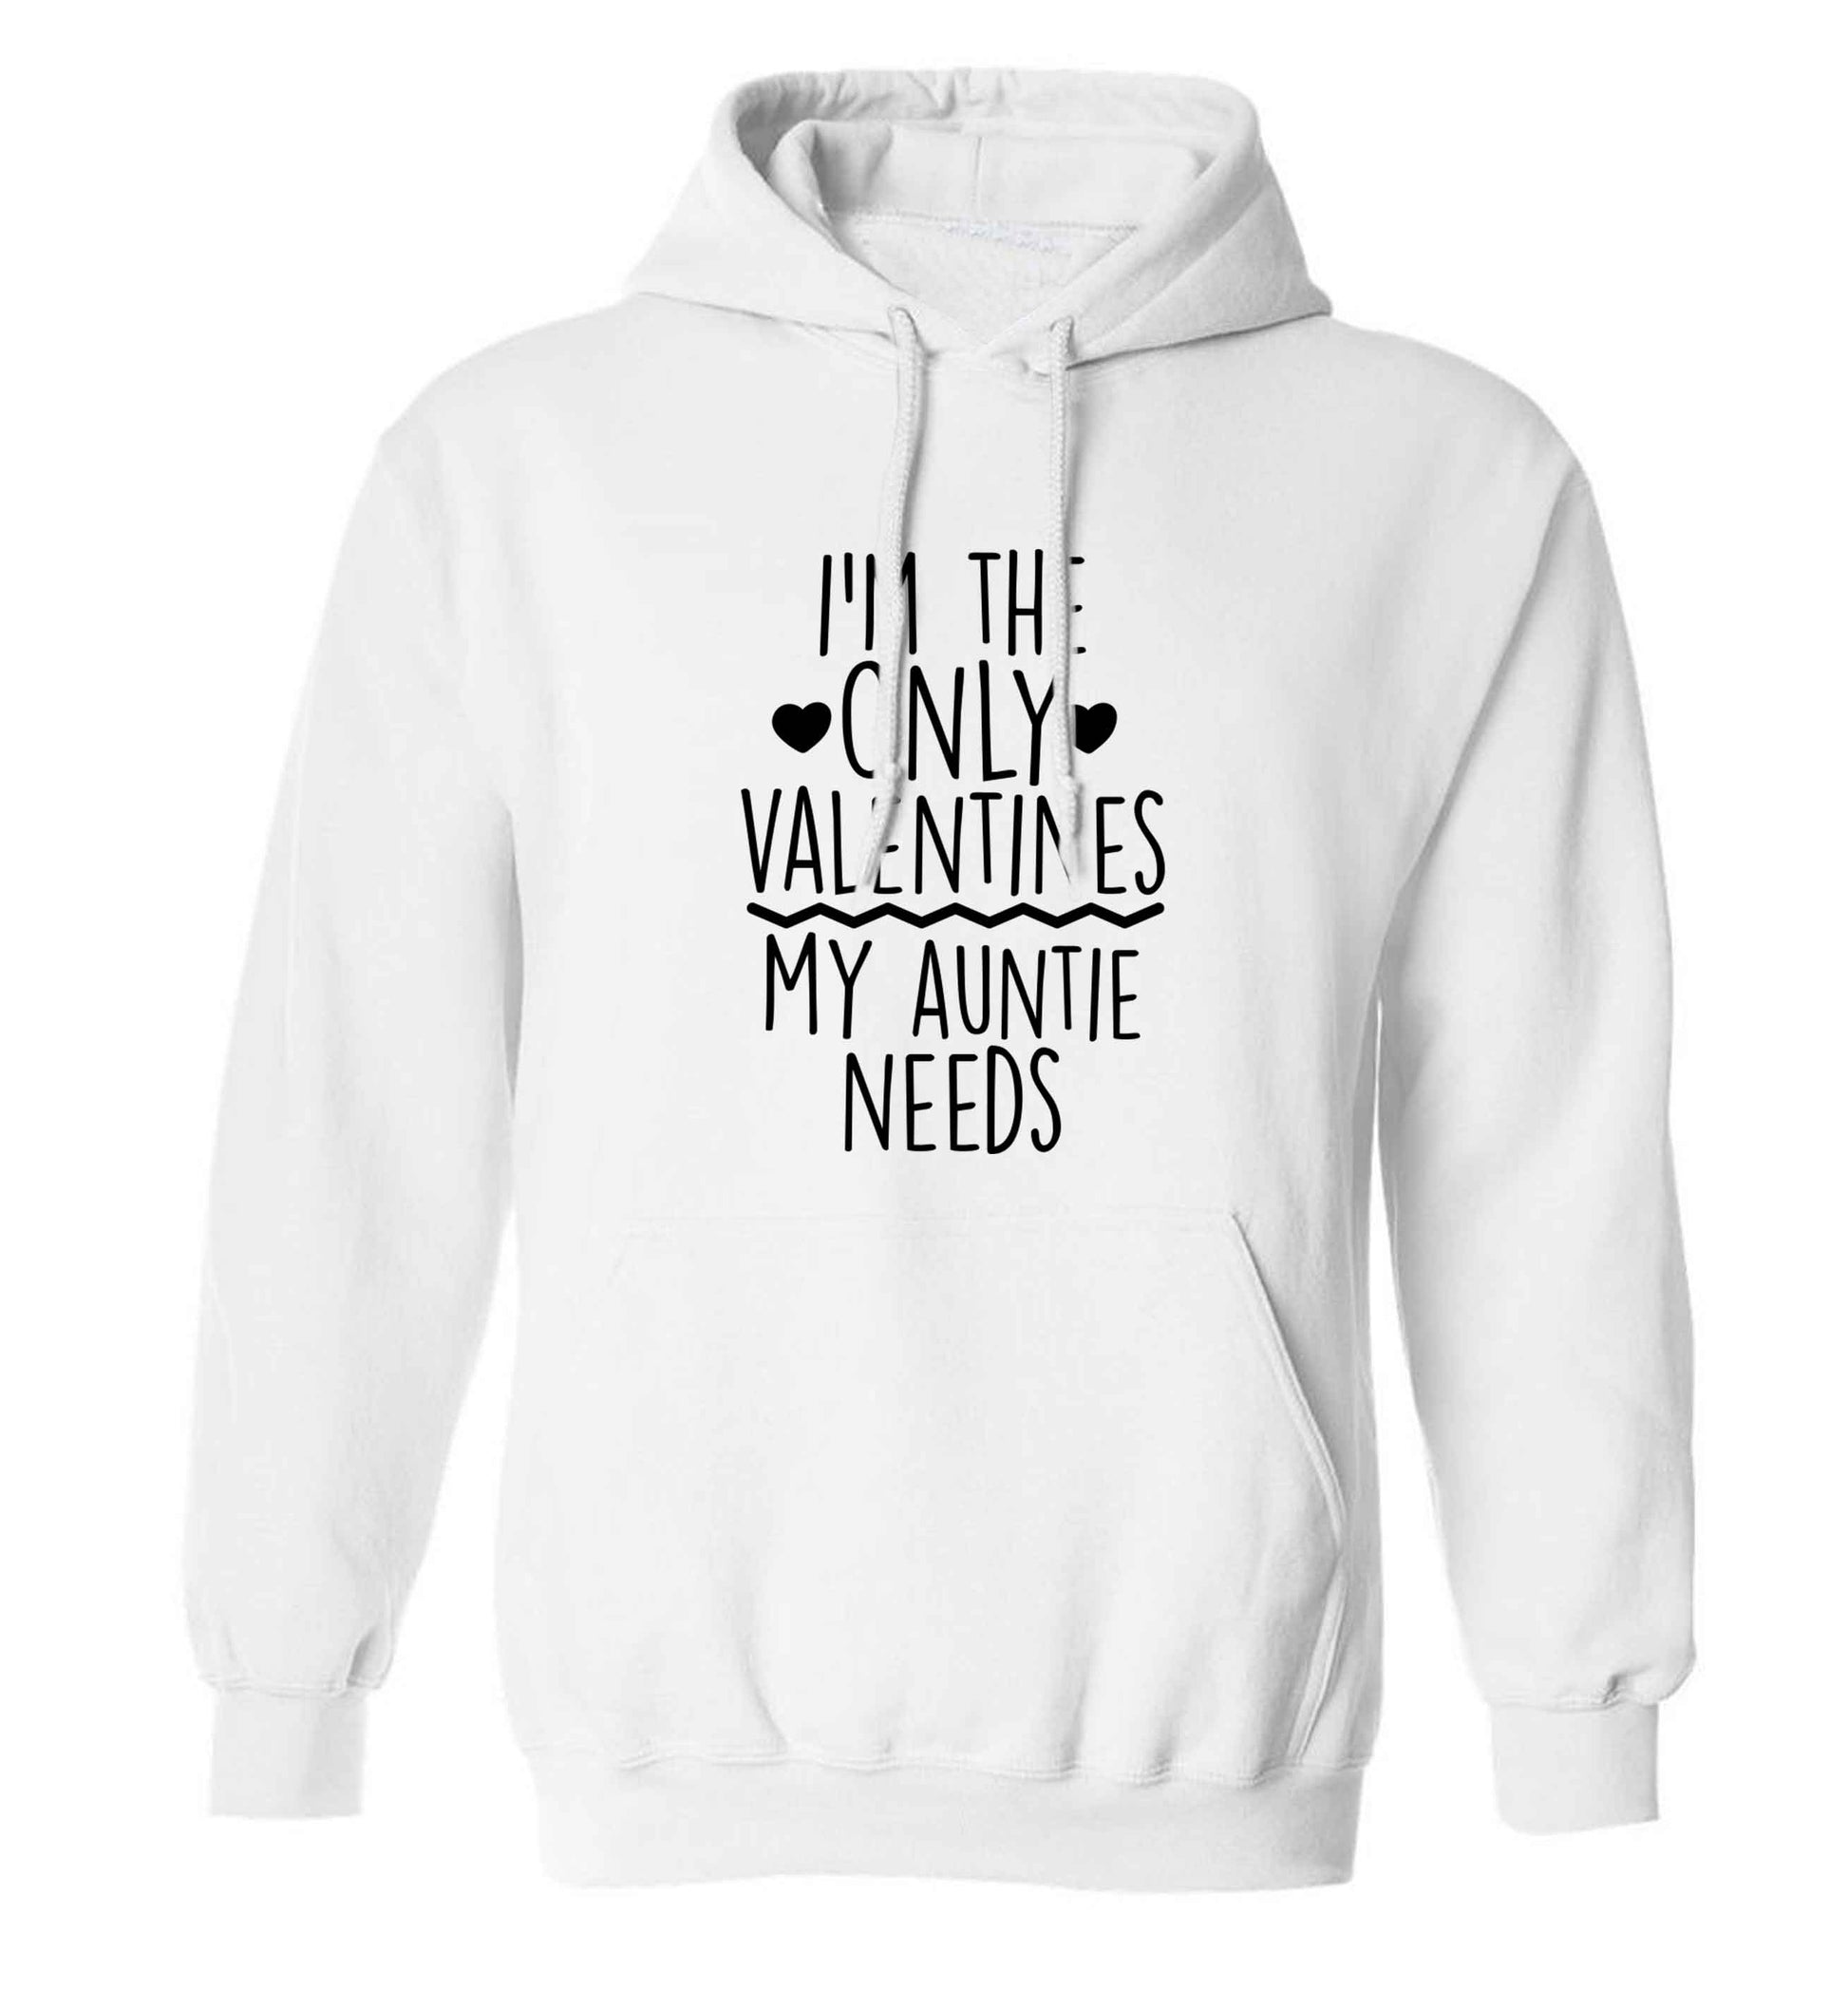 I'm the only valentines my auntie needs adults unisex white hoodie 2XL